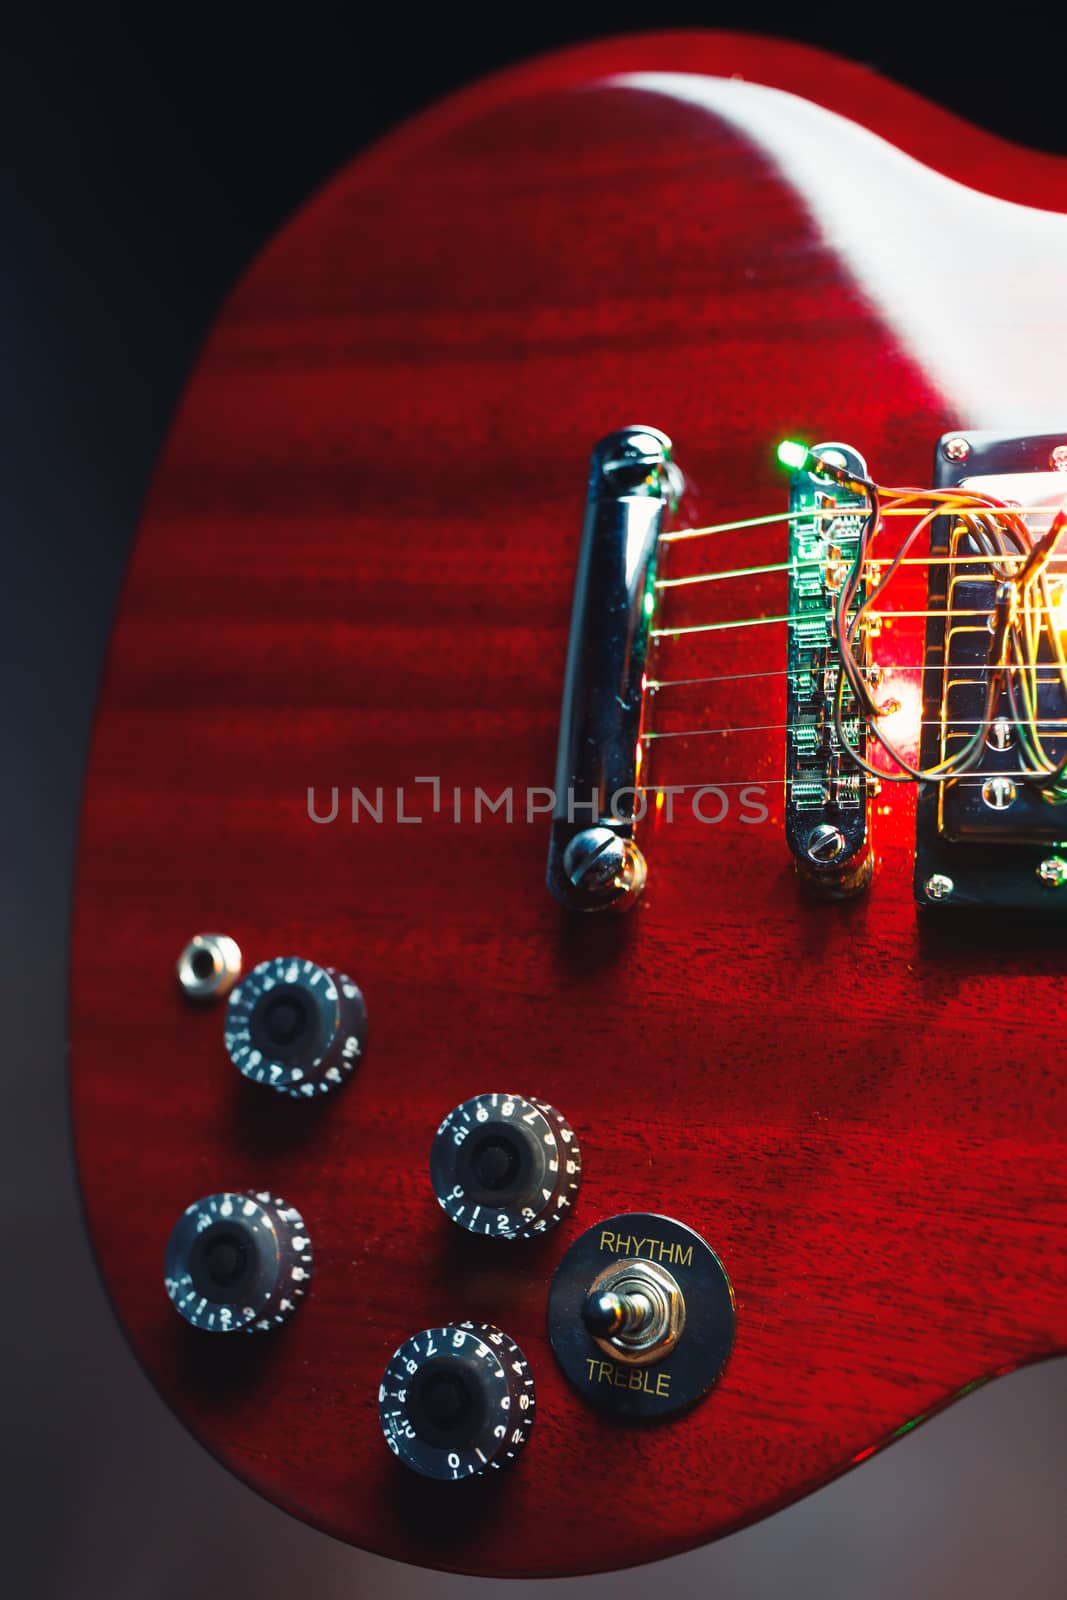 part of red guitar, close-up view